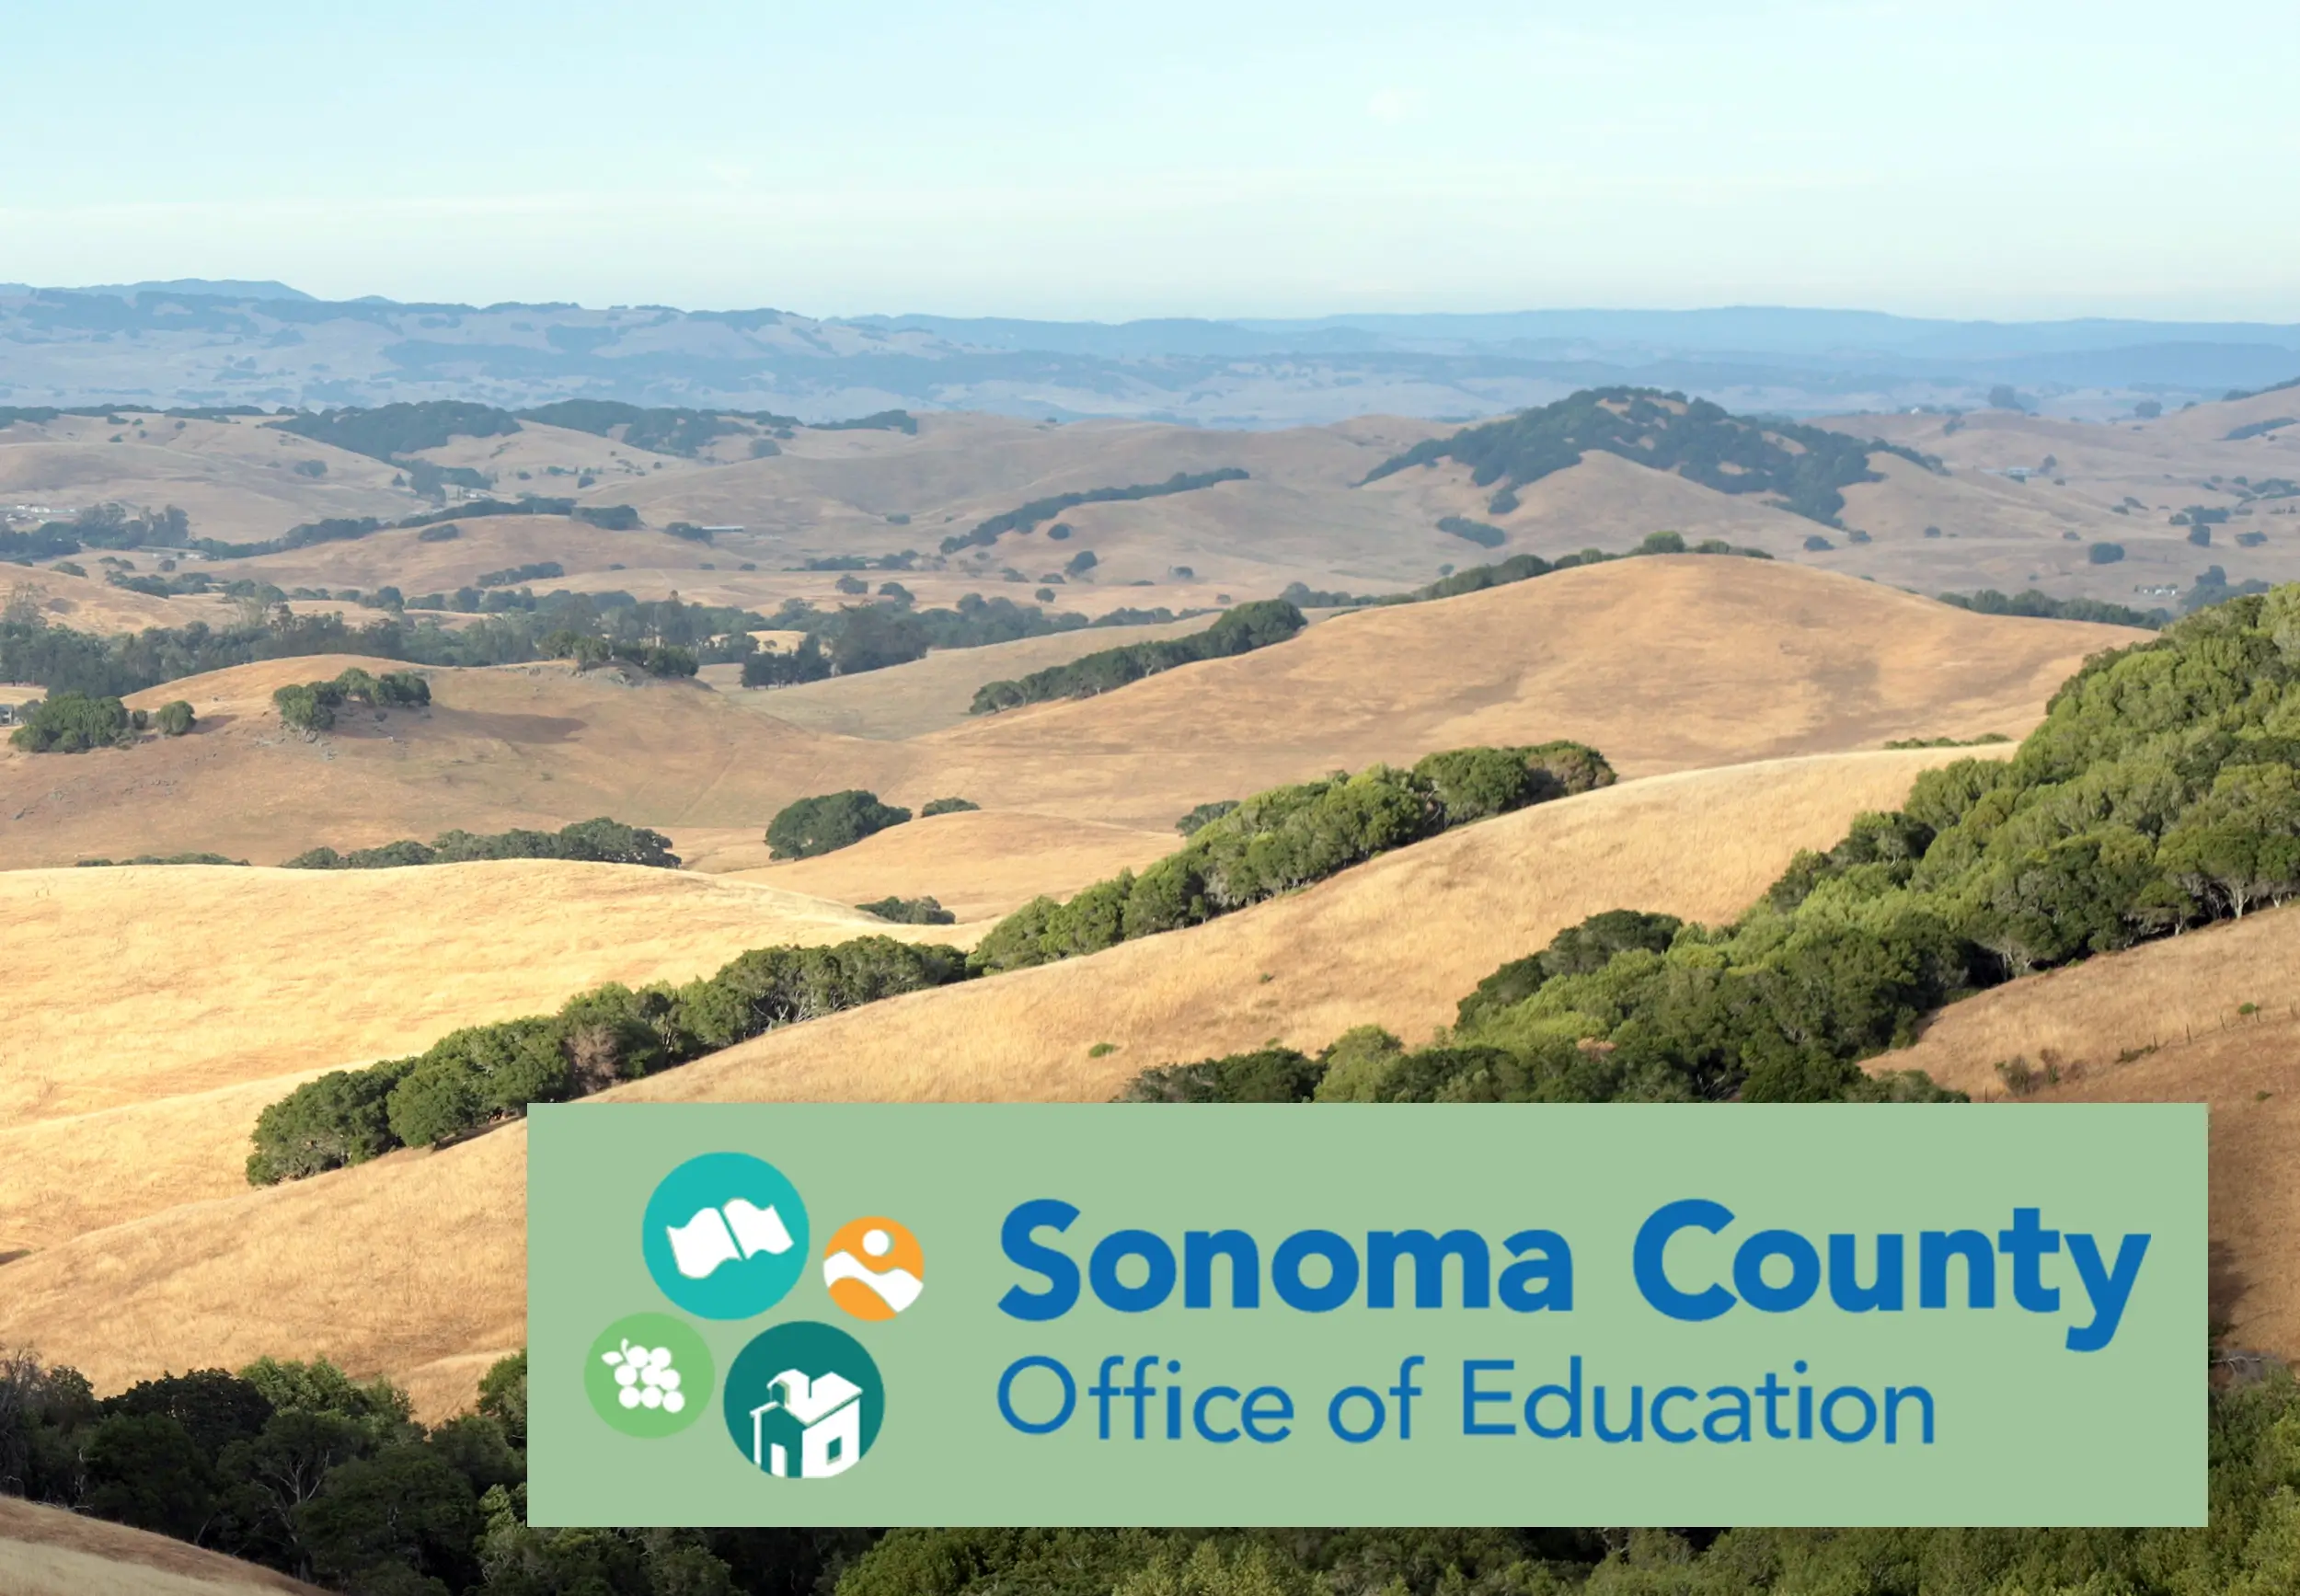 Caption Sonoma County Office of Education with their logo on top of Sonoma County hills image